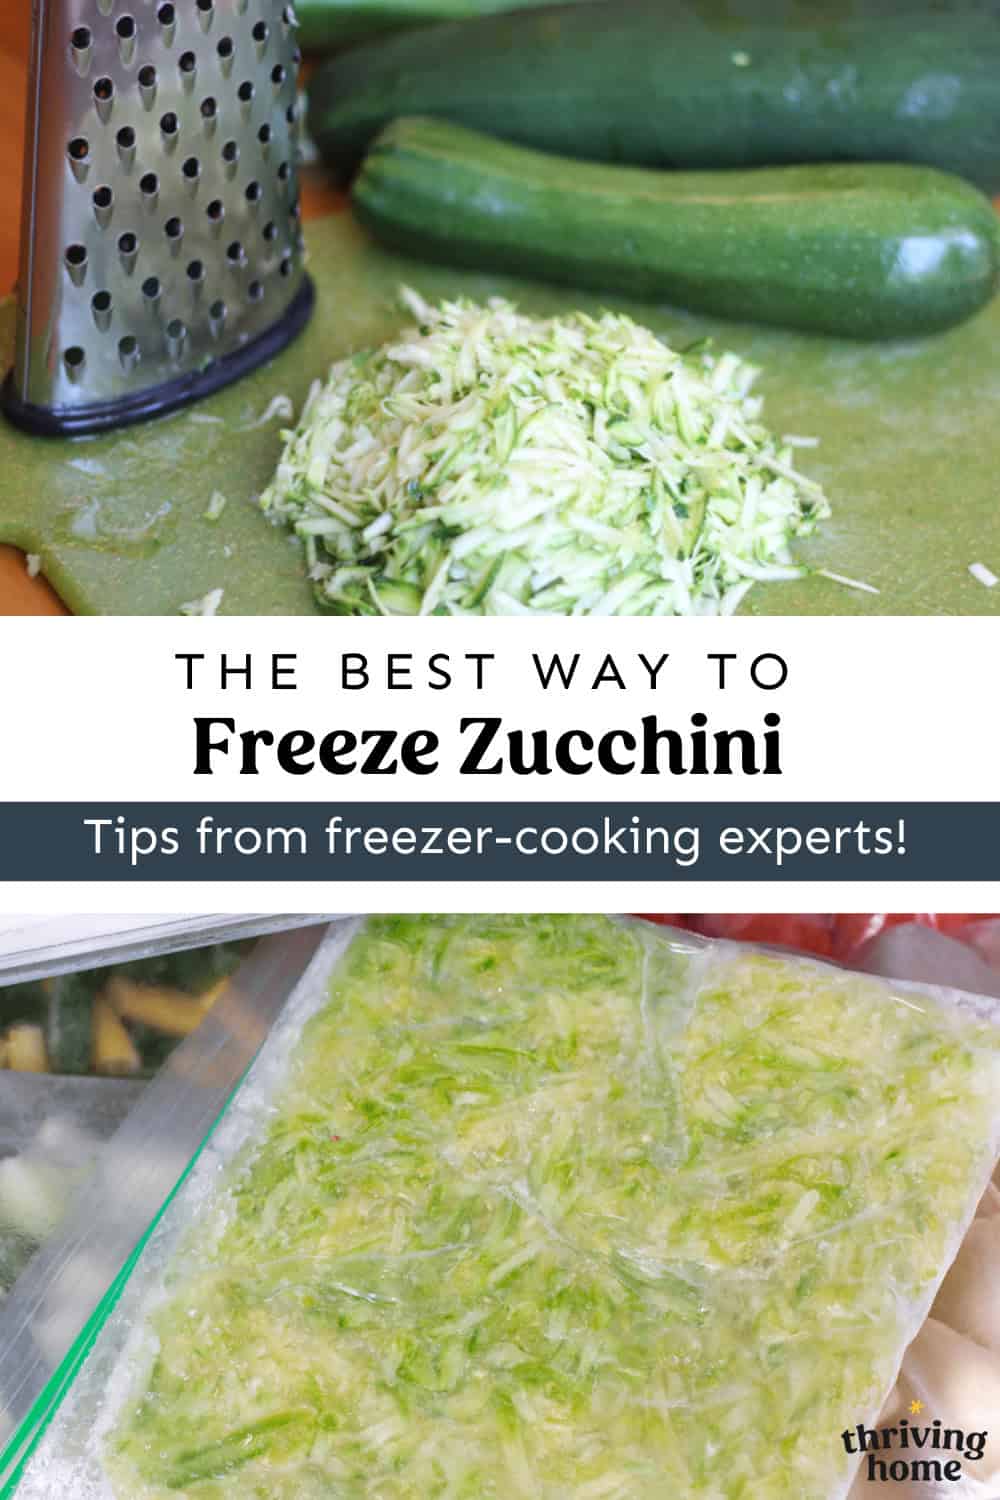 Shredded zucchini on a cutting board and then more in a freezer bag.